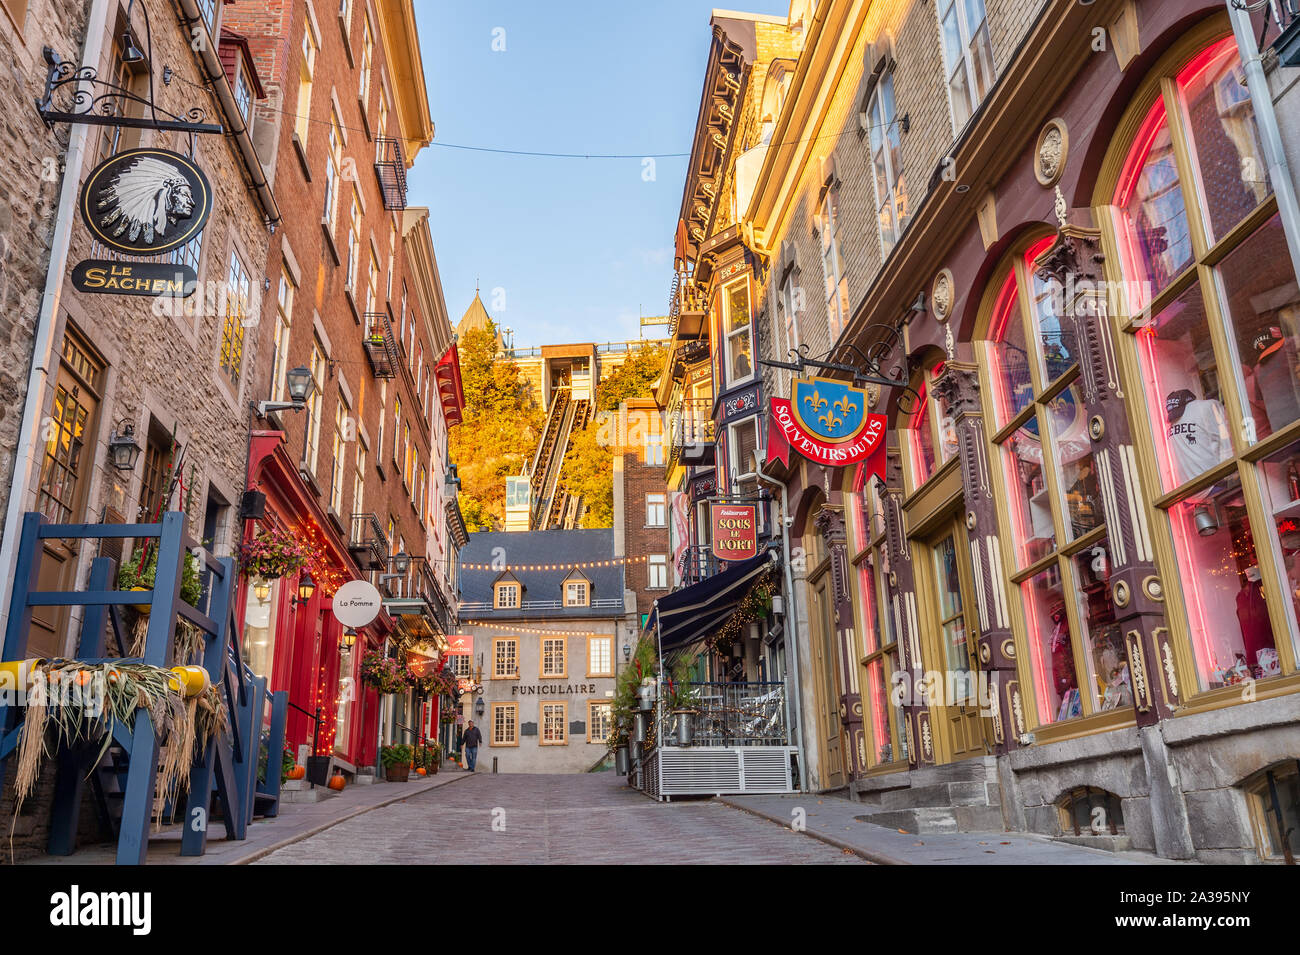 Quebec City, Canada - 5 October 2019: Rue Sous le Fort and Quebec funicular in the background. Stock Photo